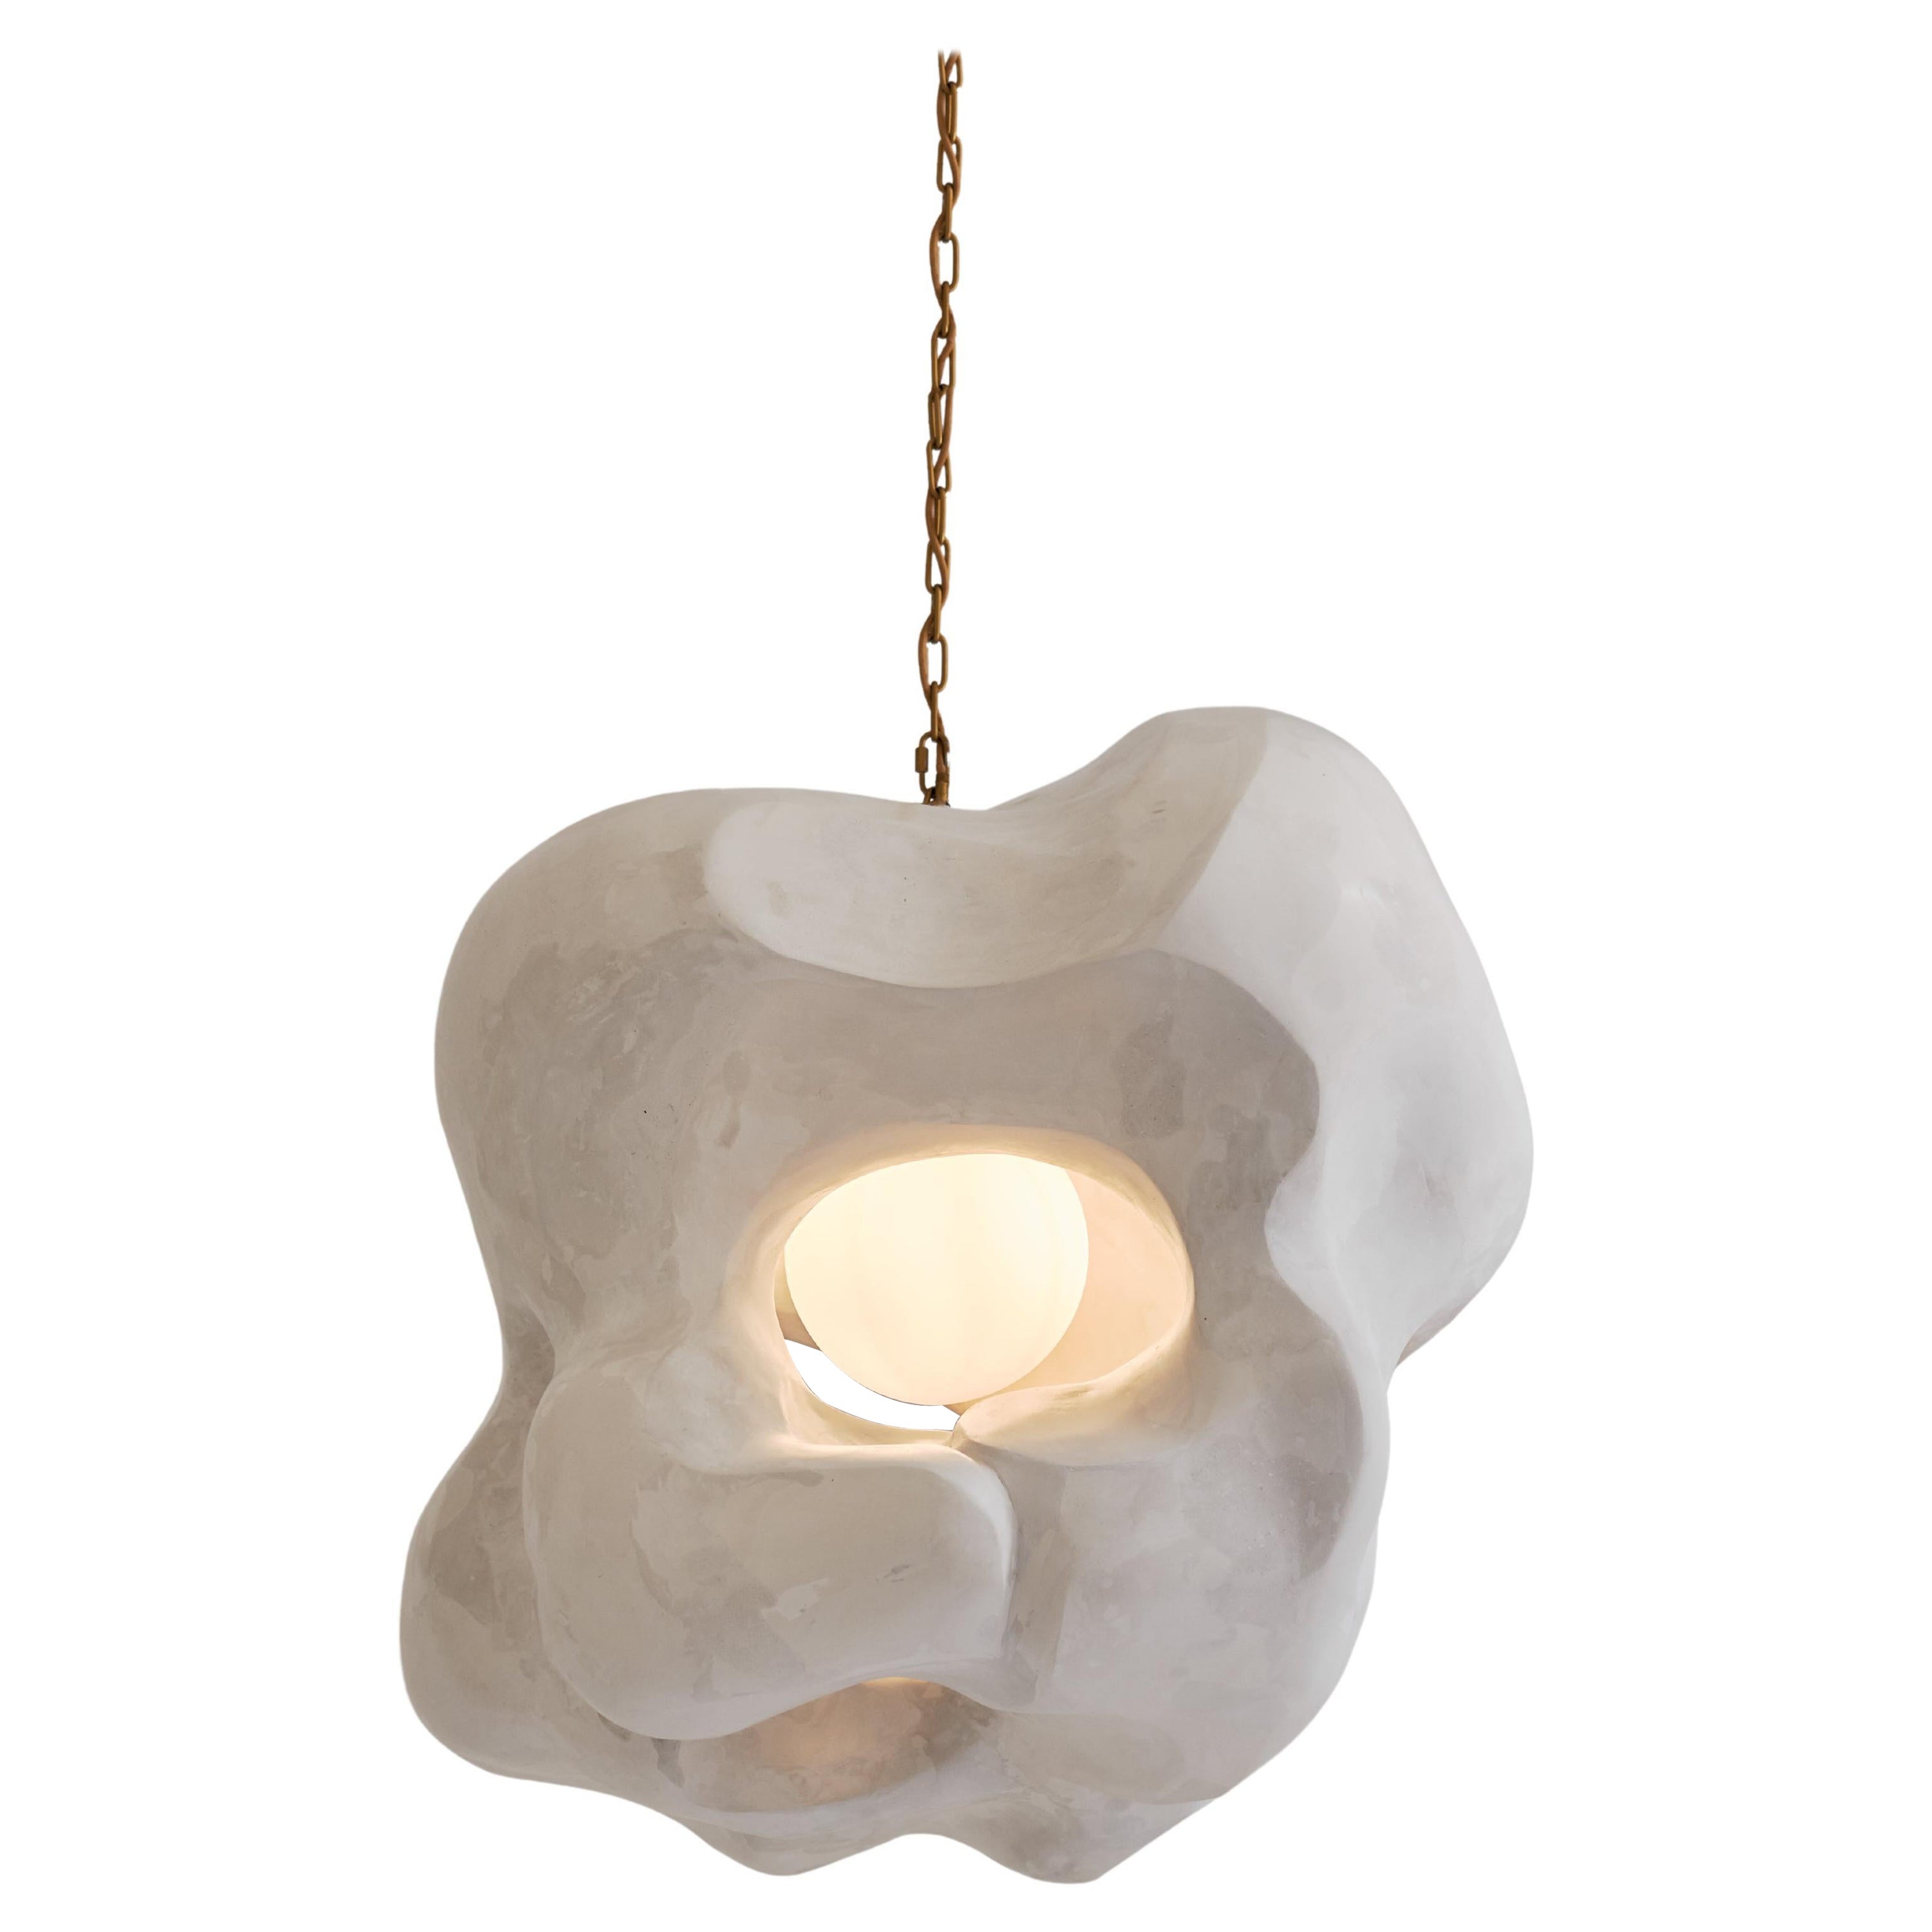 Contemporary Pendant Light, Sculptural Collectible Design "Ikigai" by AOAO For Sale